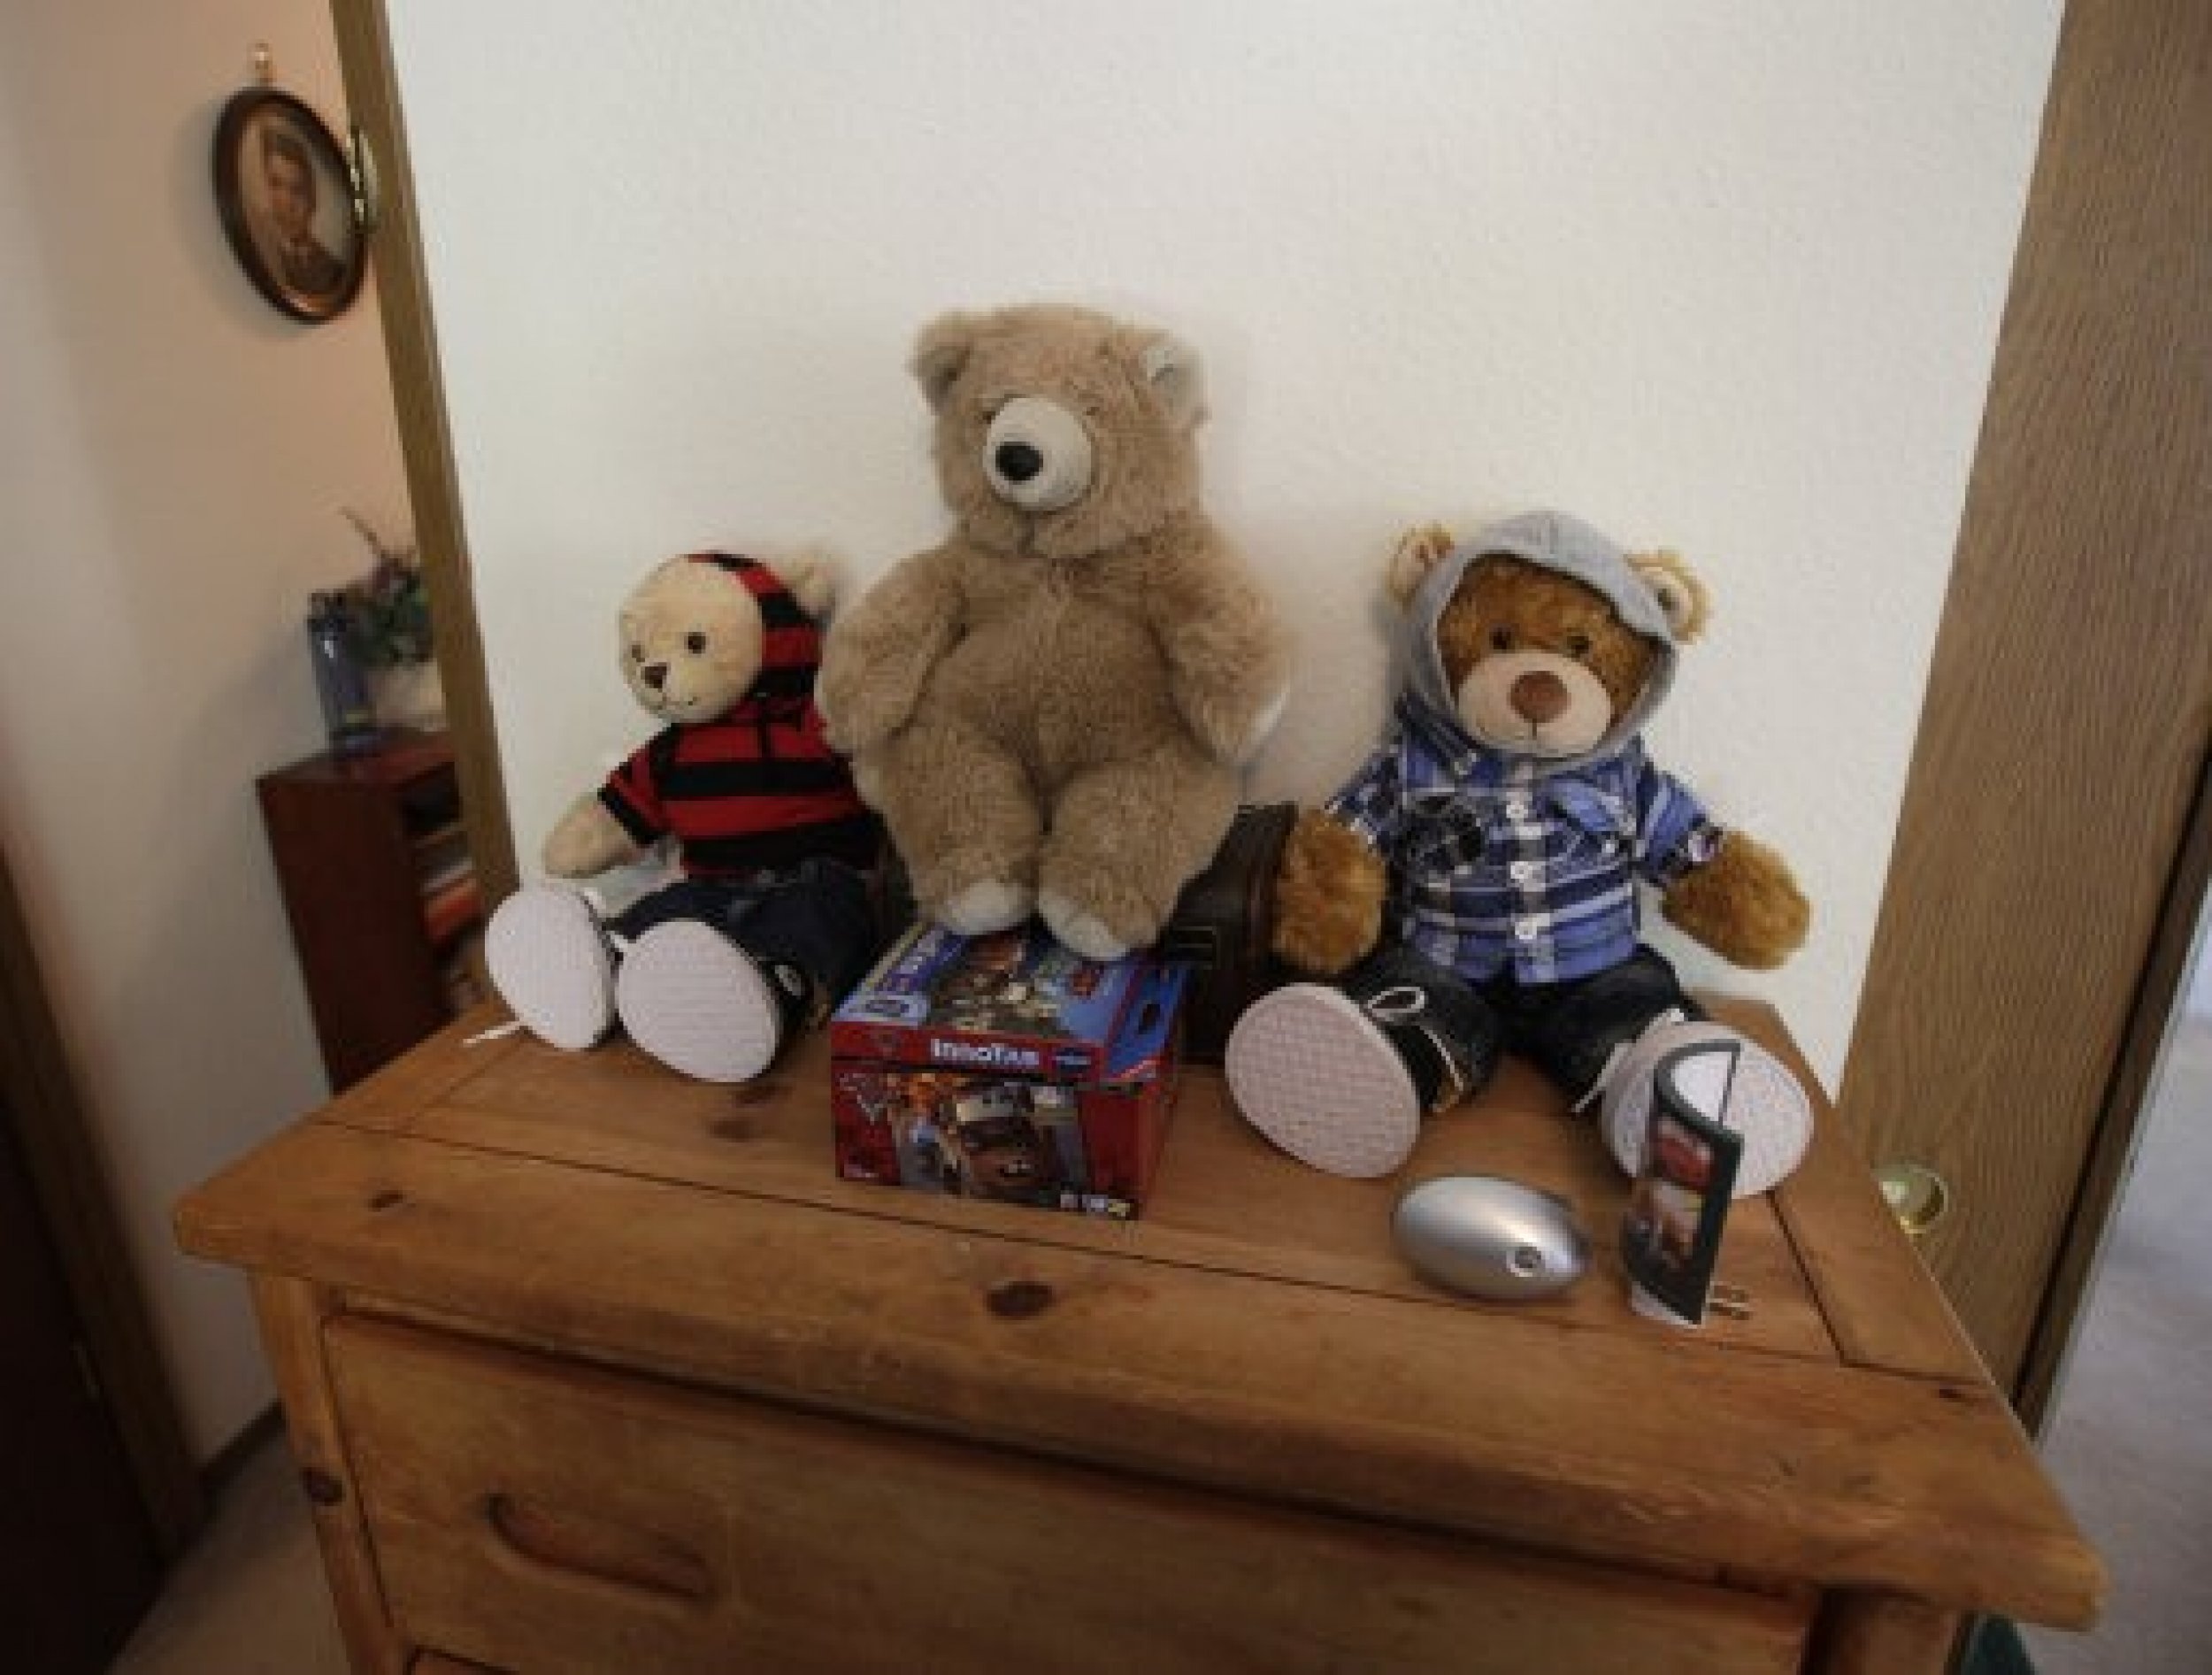 Toys and other keepsakes are shown in a room in the home of Chuck Cox that was used by his grandsons, Charlie and Braden.